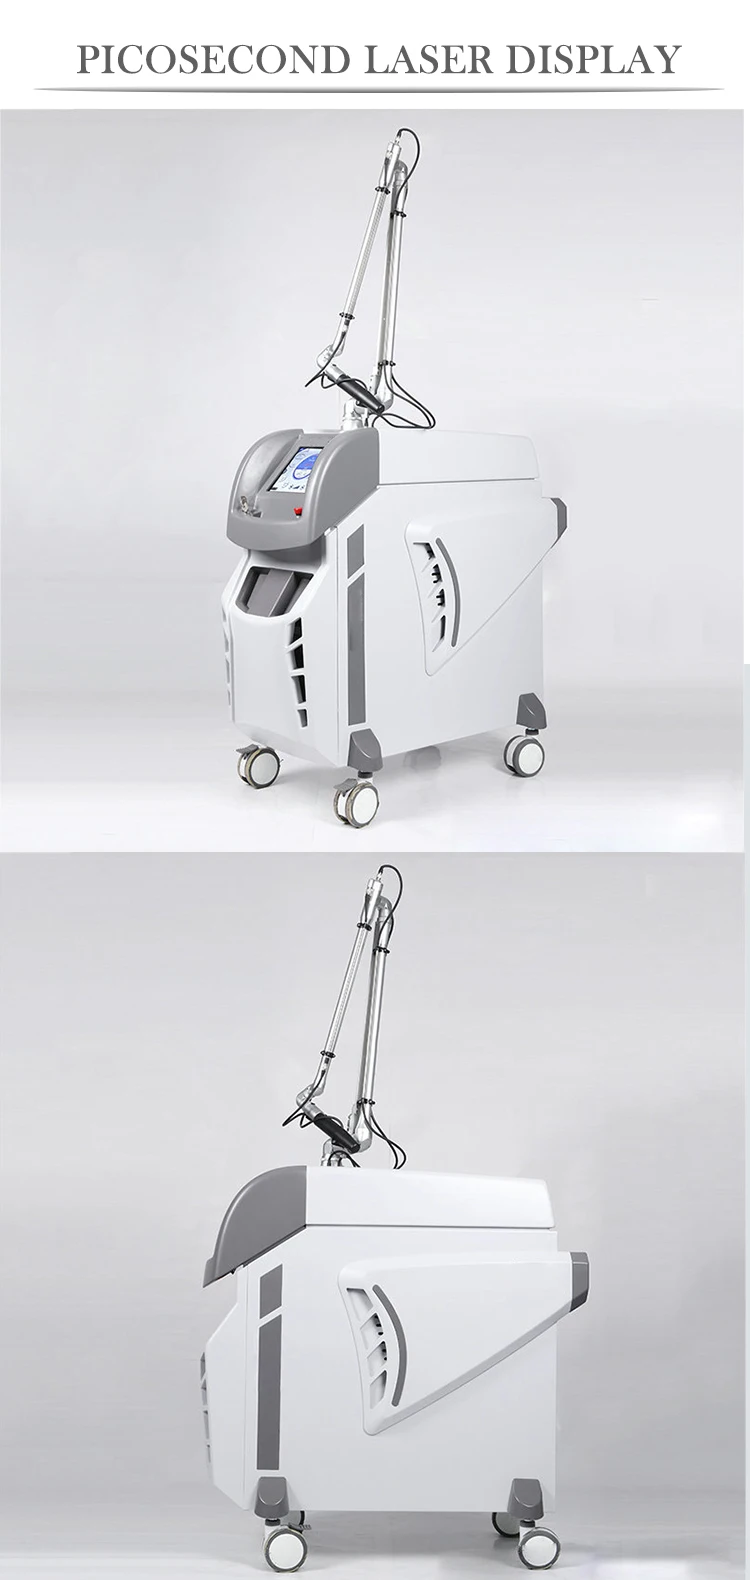 Norin picosecond laser 450PS Picolaser dark spot removal tattoo acne removal q switched nd yag laser picosecond laser for tattoo